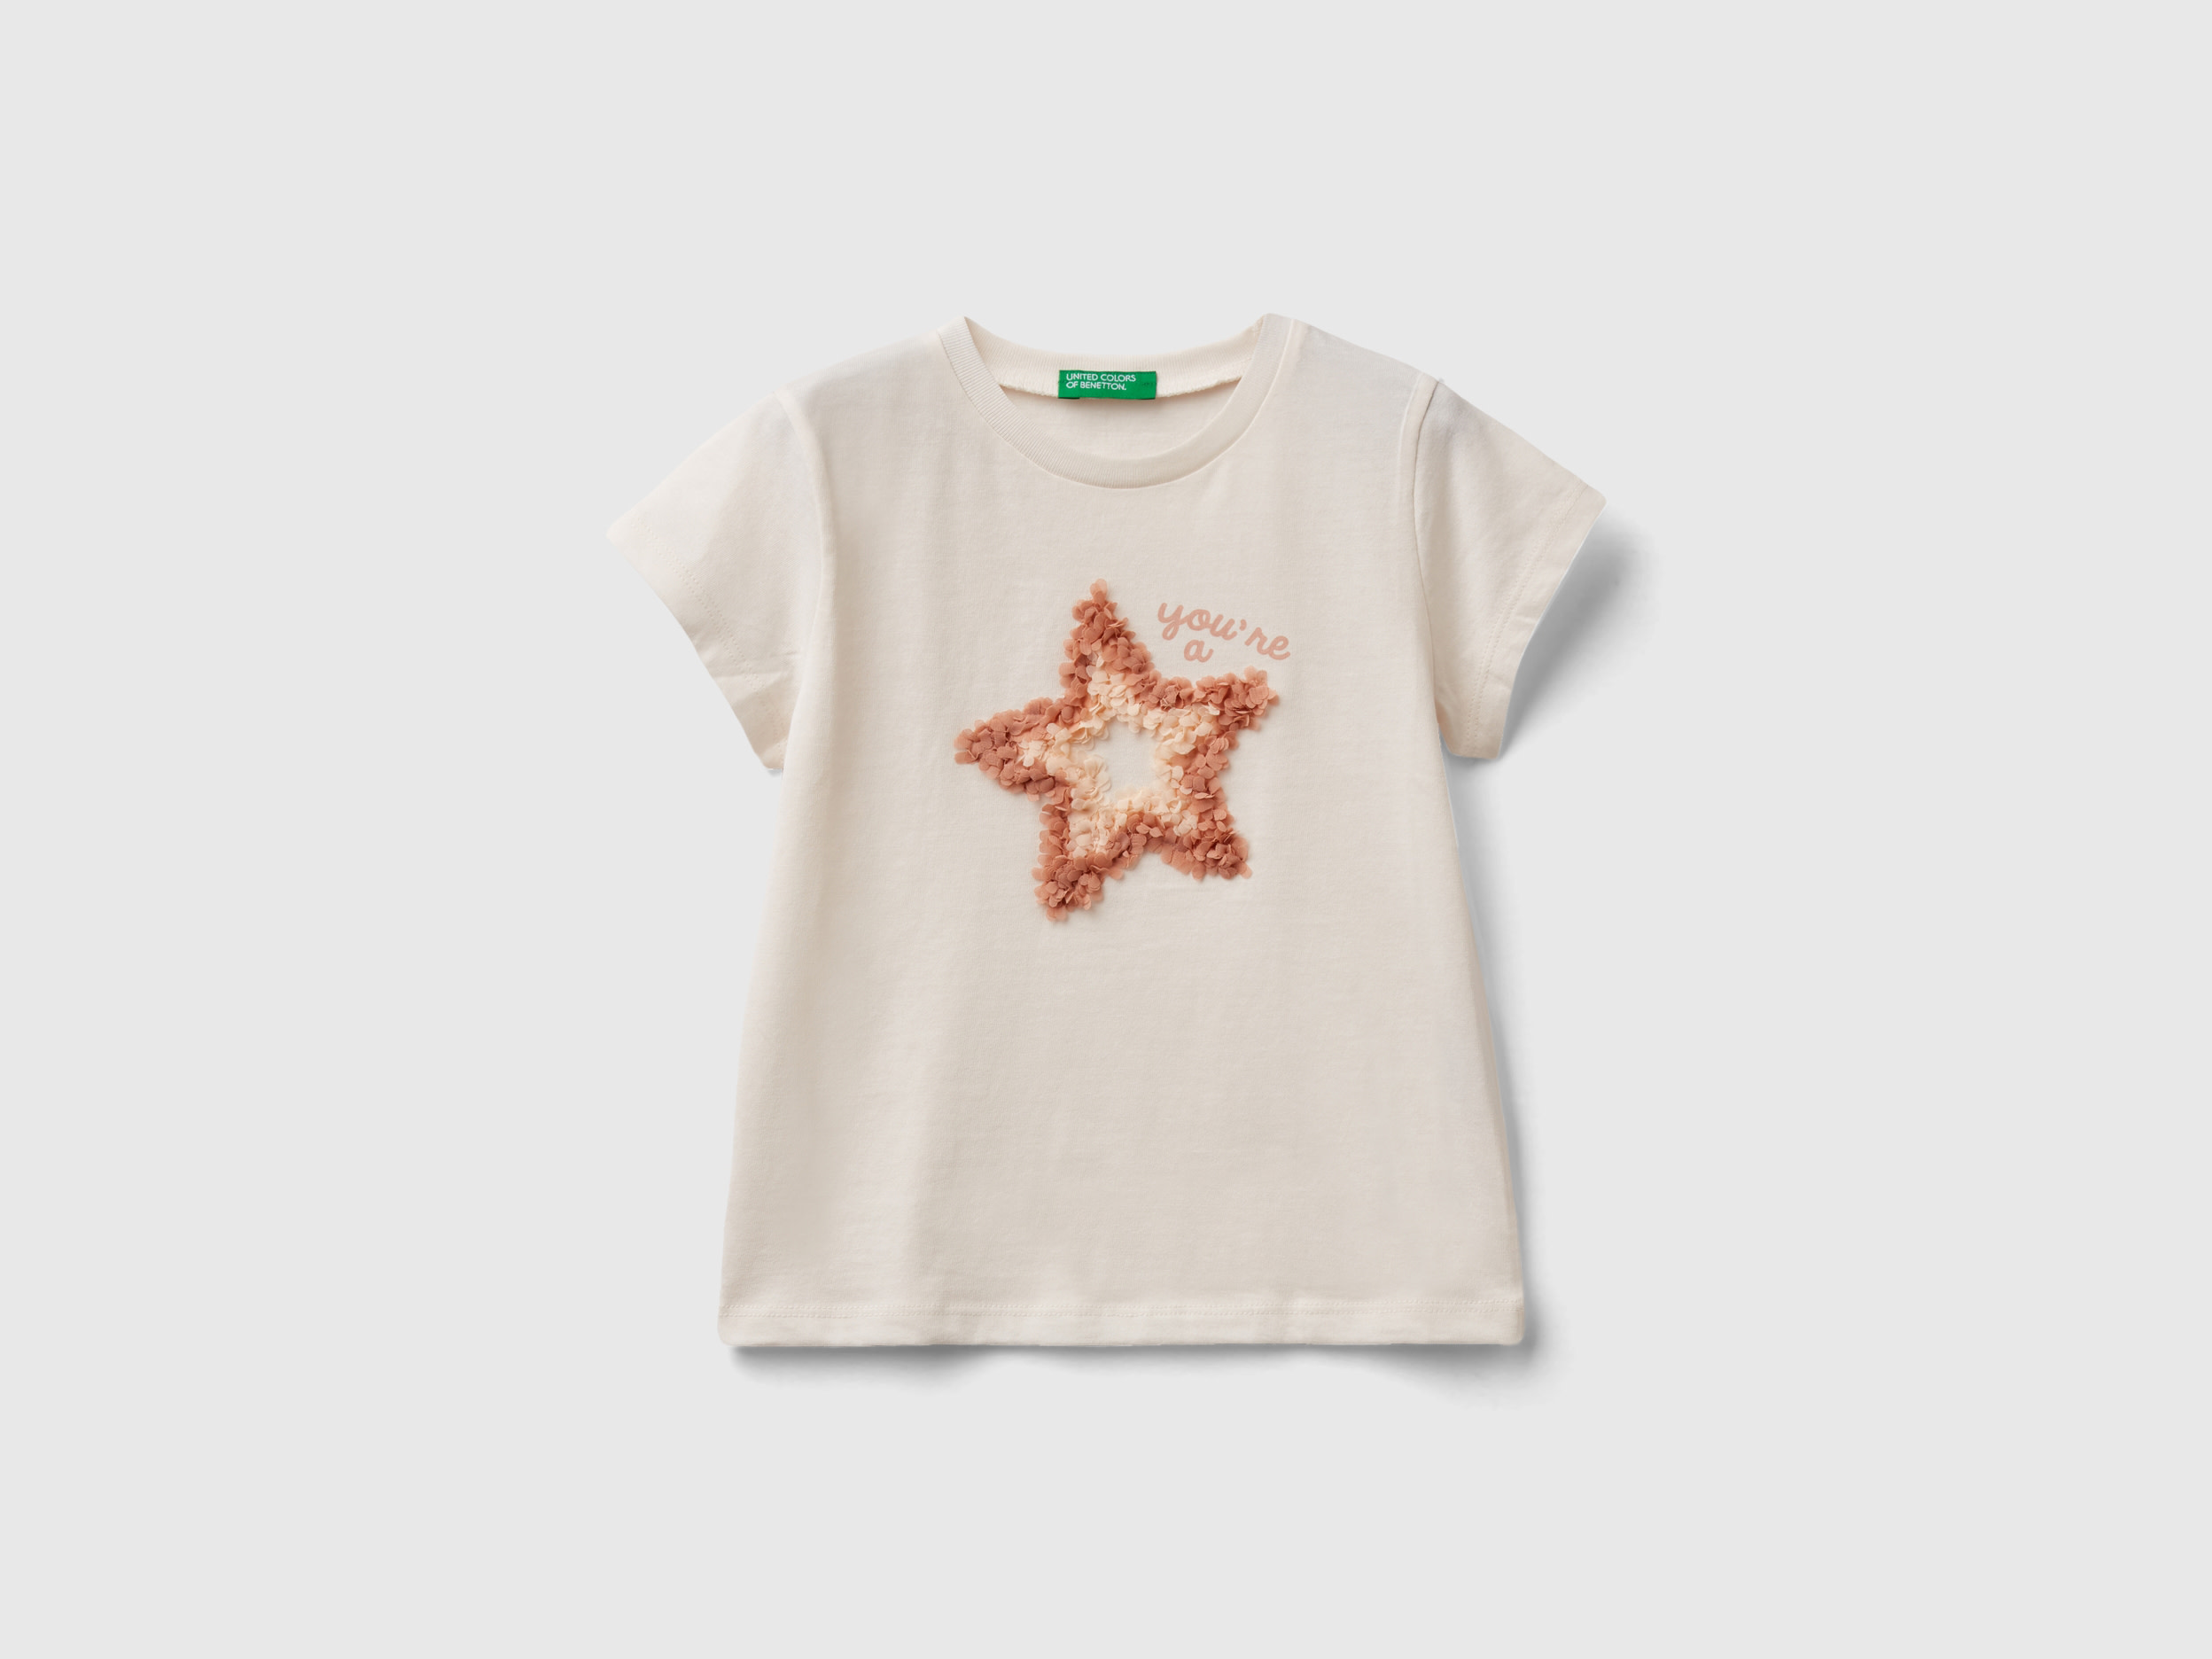 Image of Benetton, T-shirt With Petal Effect Applique, size 104, Creamy White, Kids